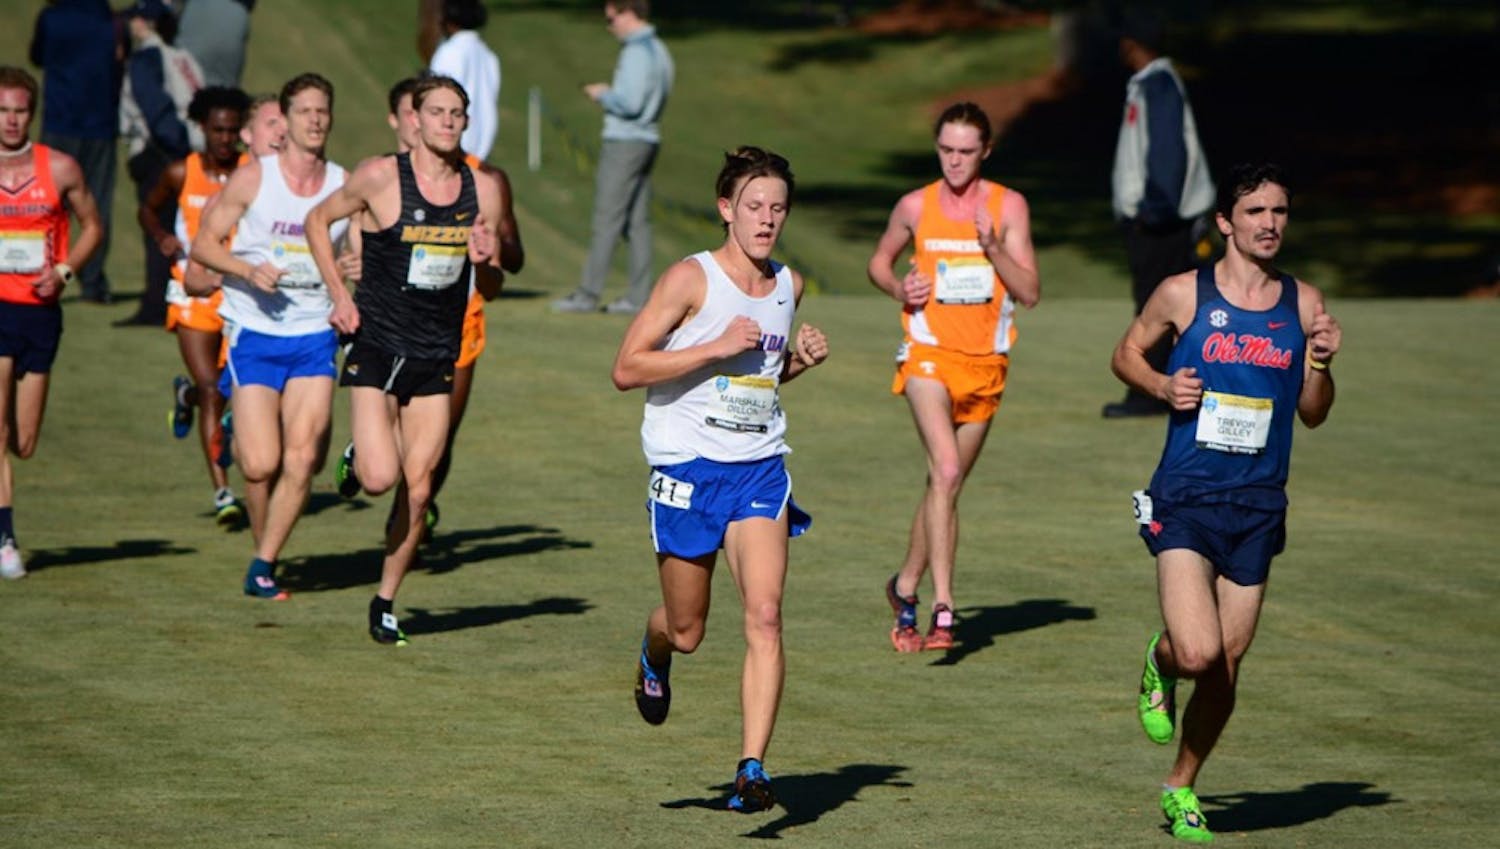 UF runner Marshall Dillon led all Florida runners with a personal-best time of 25:03.9, good enough for 38th place and a spot on the SEC All-Freshman team.